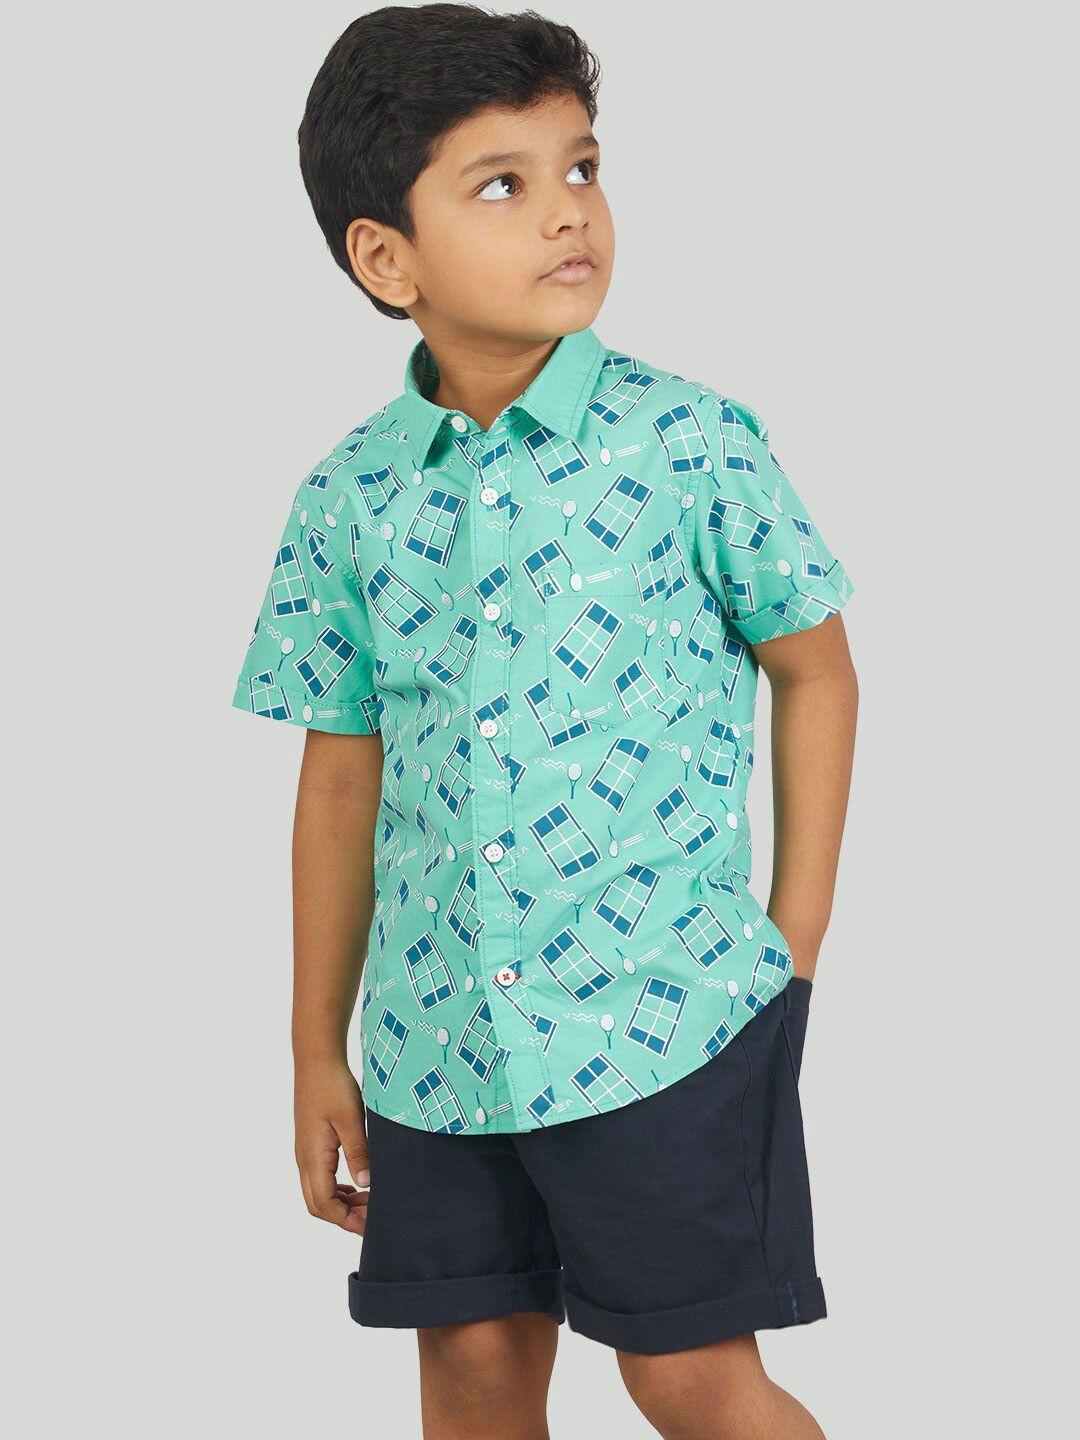 zalio boys teal & navy blue printed pure cotton shirt with shorts